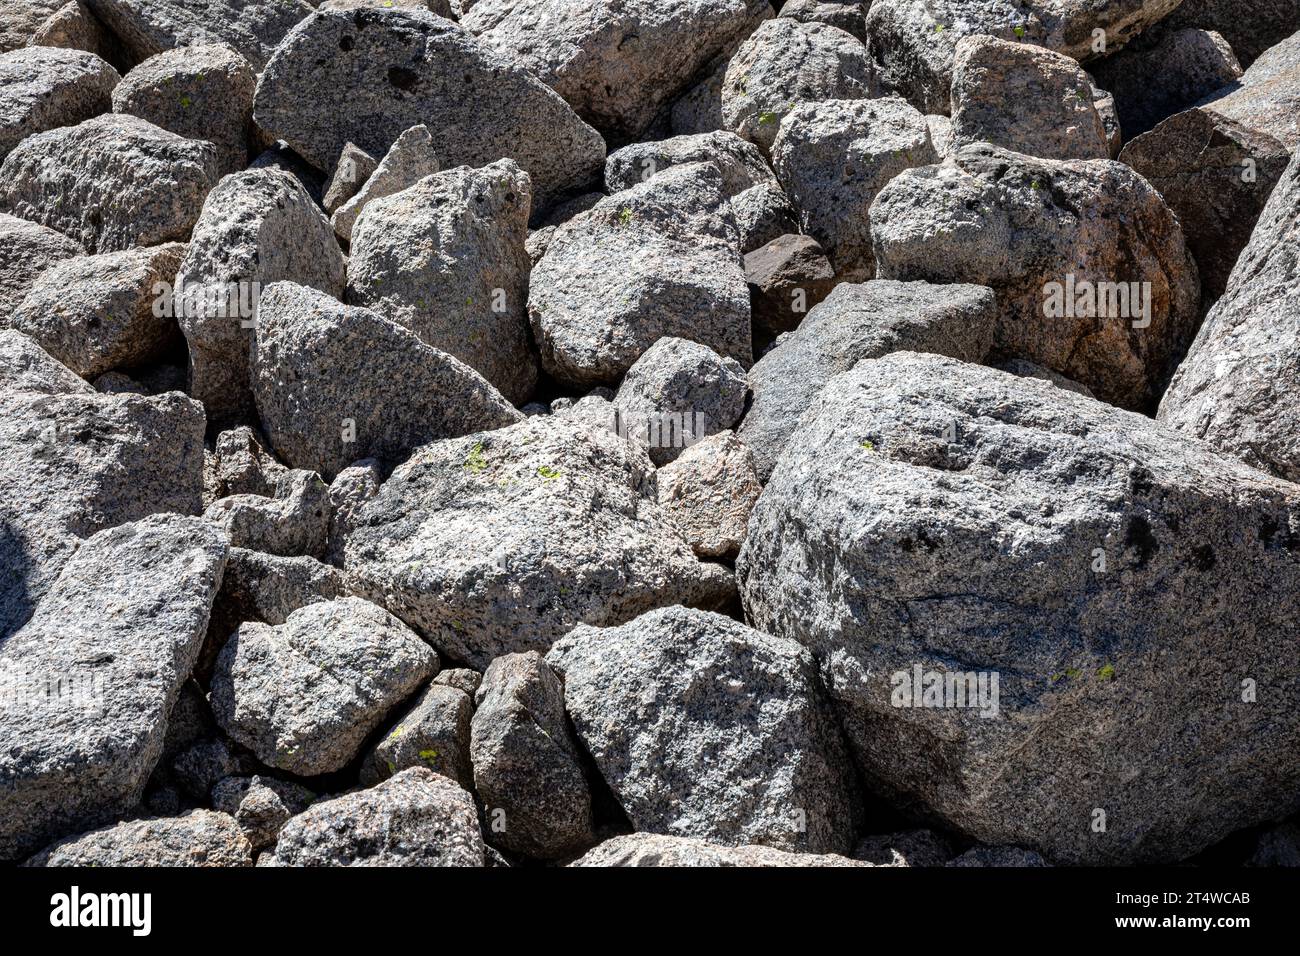 WY05571-00...WYOMING - Granitic boulders surrounding Upper Bear Lake in the Popo Agie Wilderness area of the Wind River Range. Stock Photo